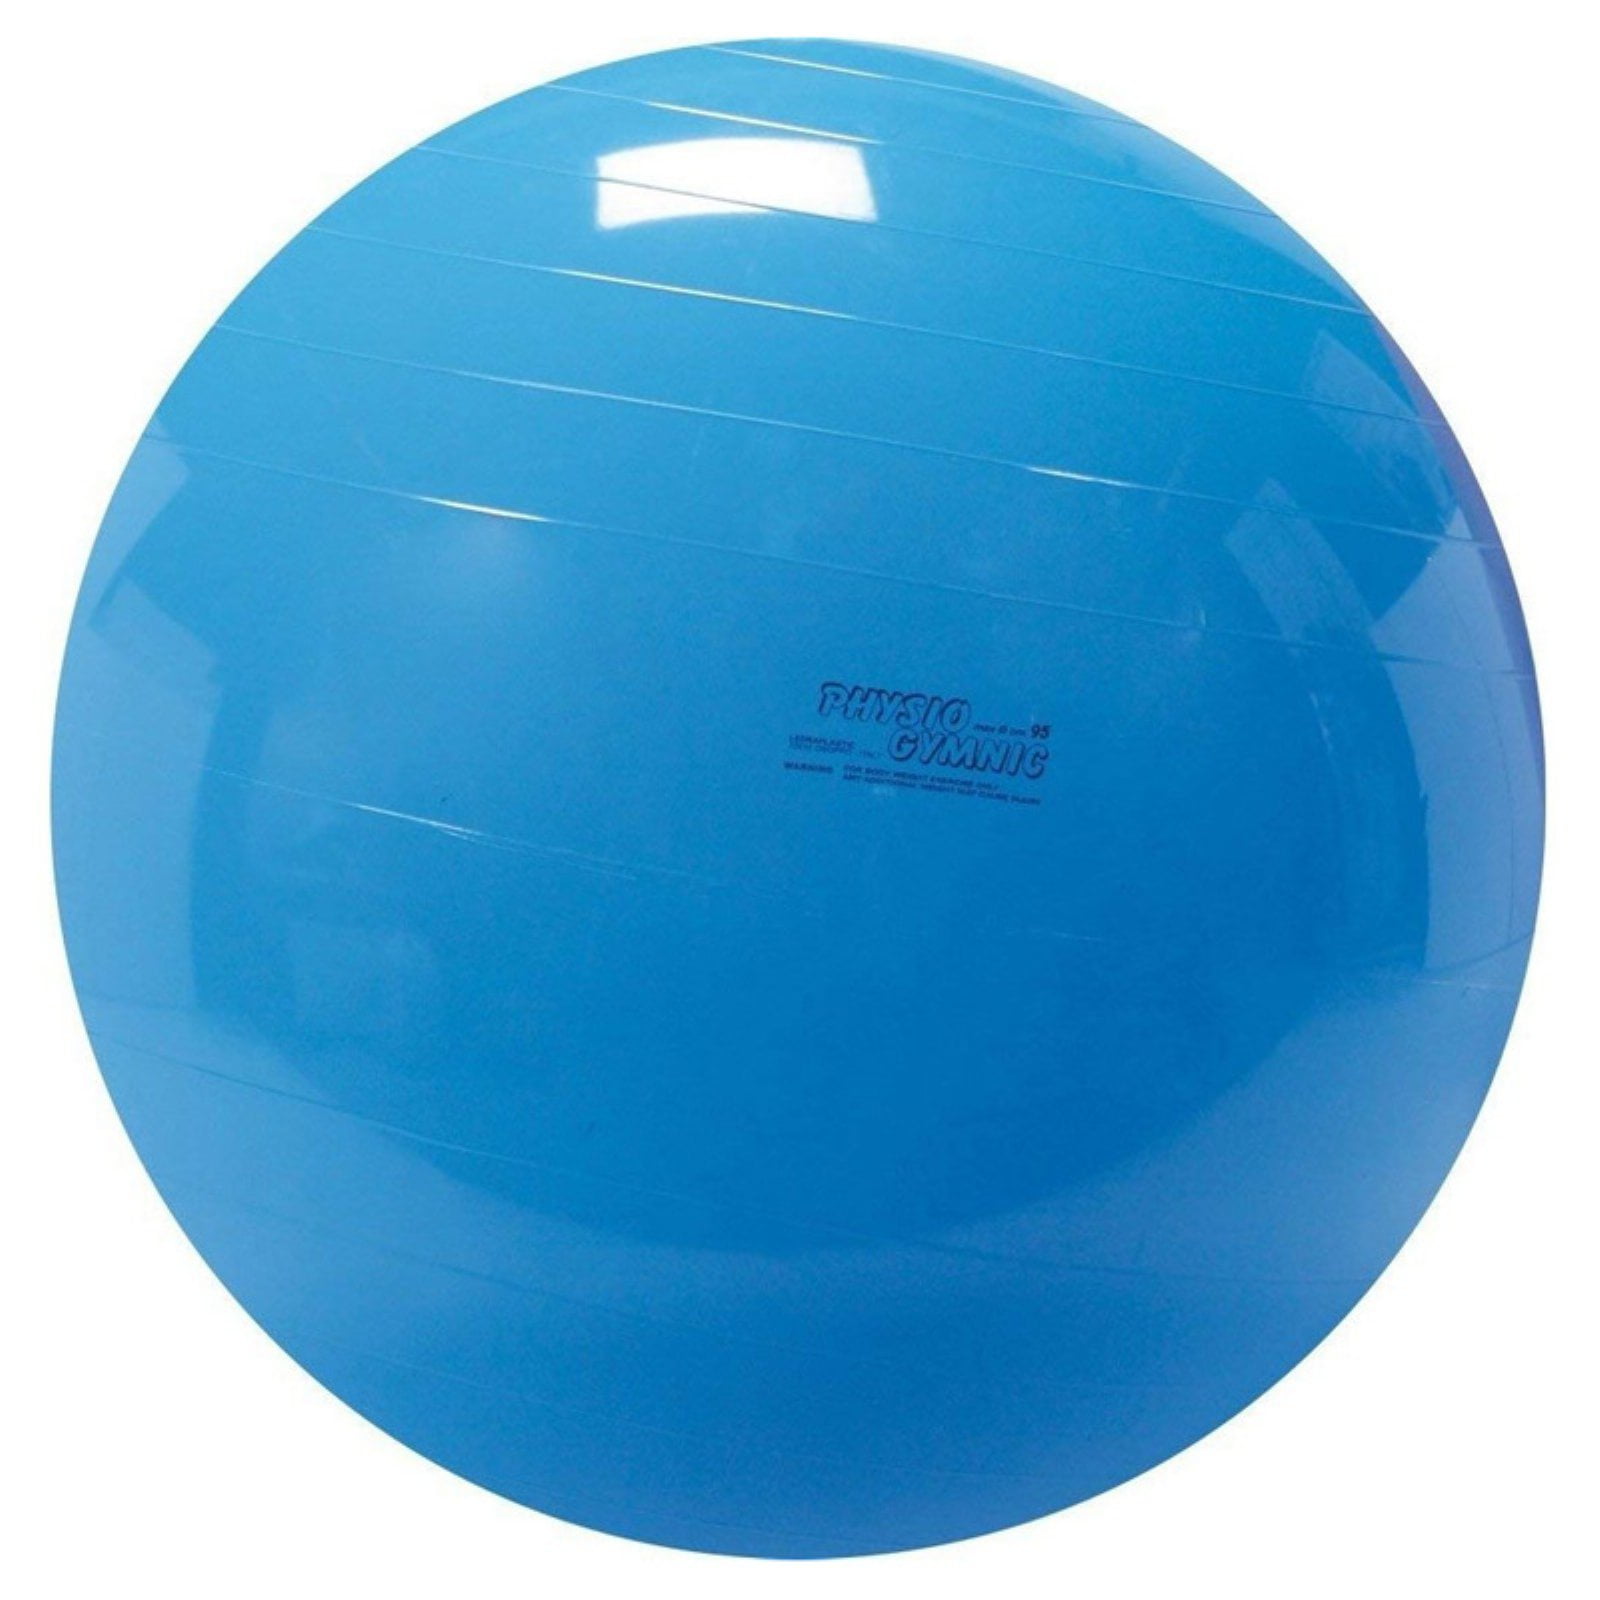 Spin doctor Physio ball, Strength Equipment